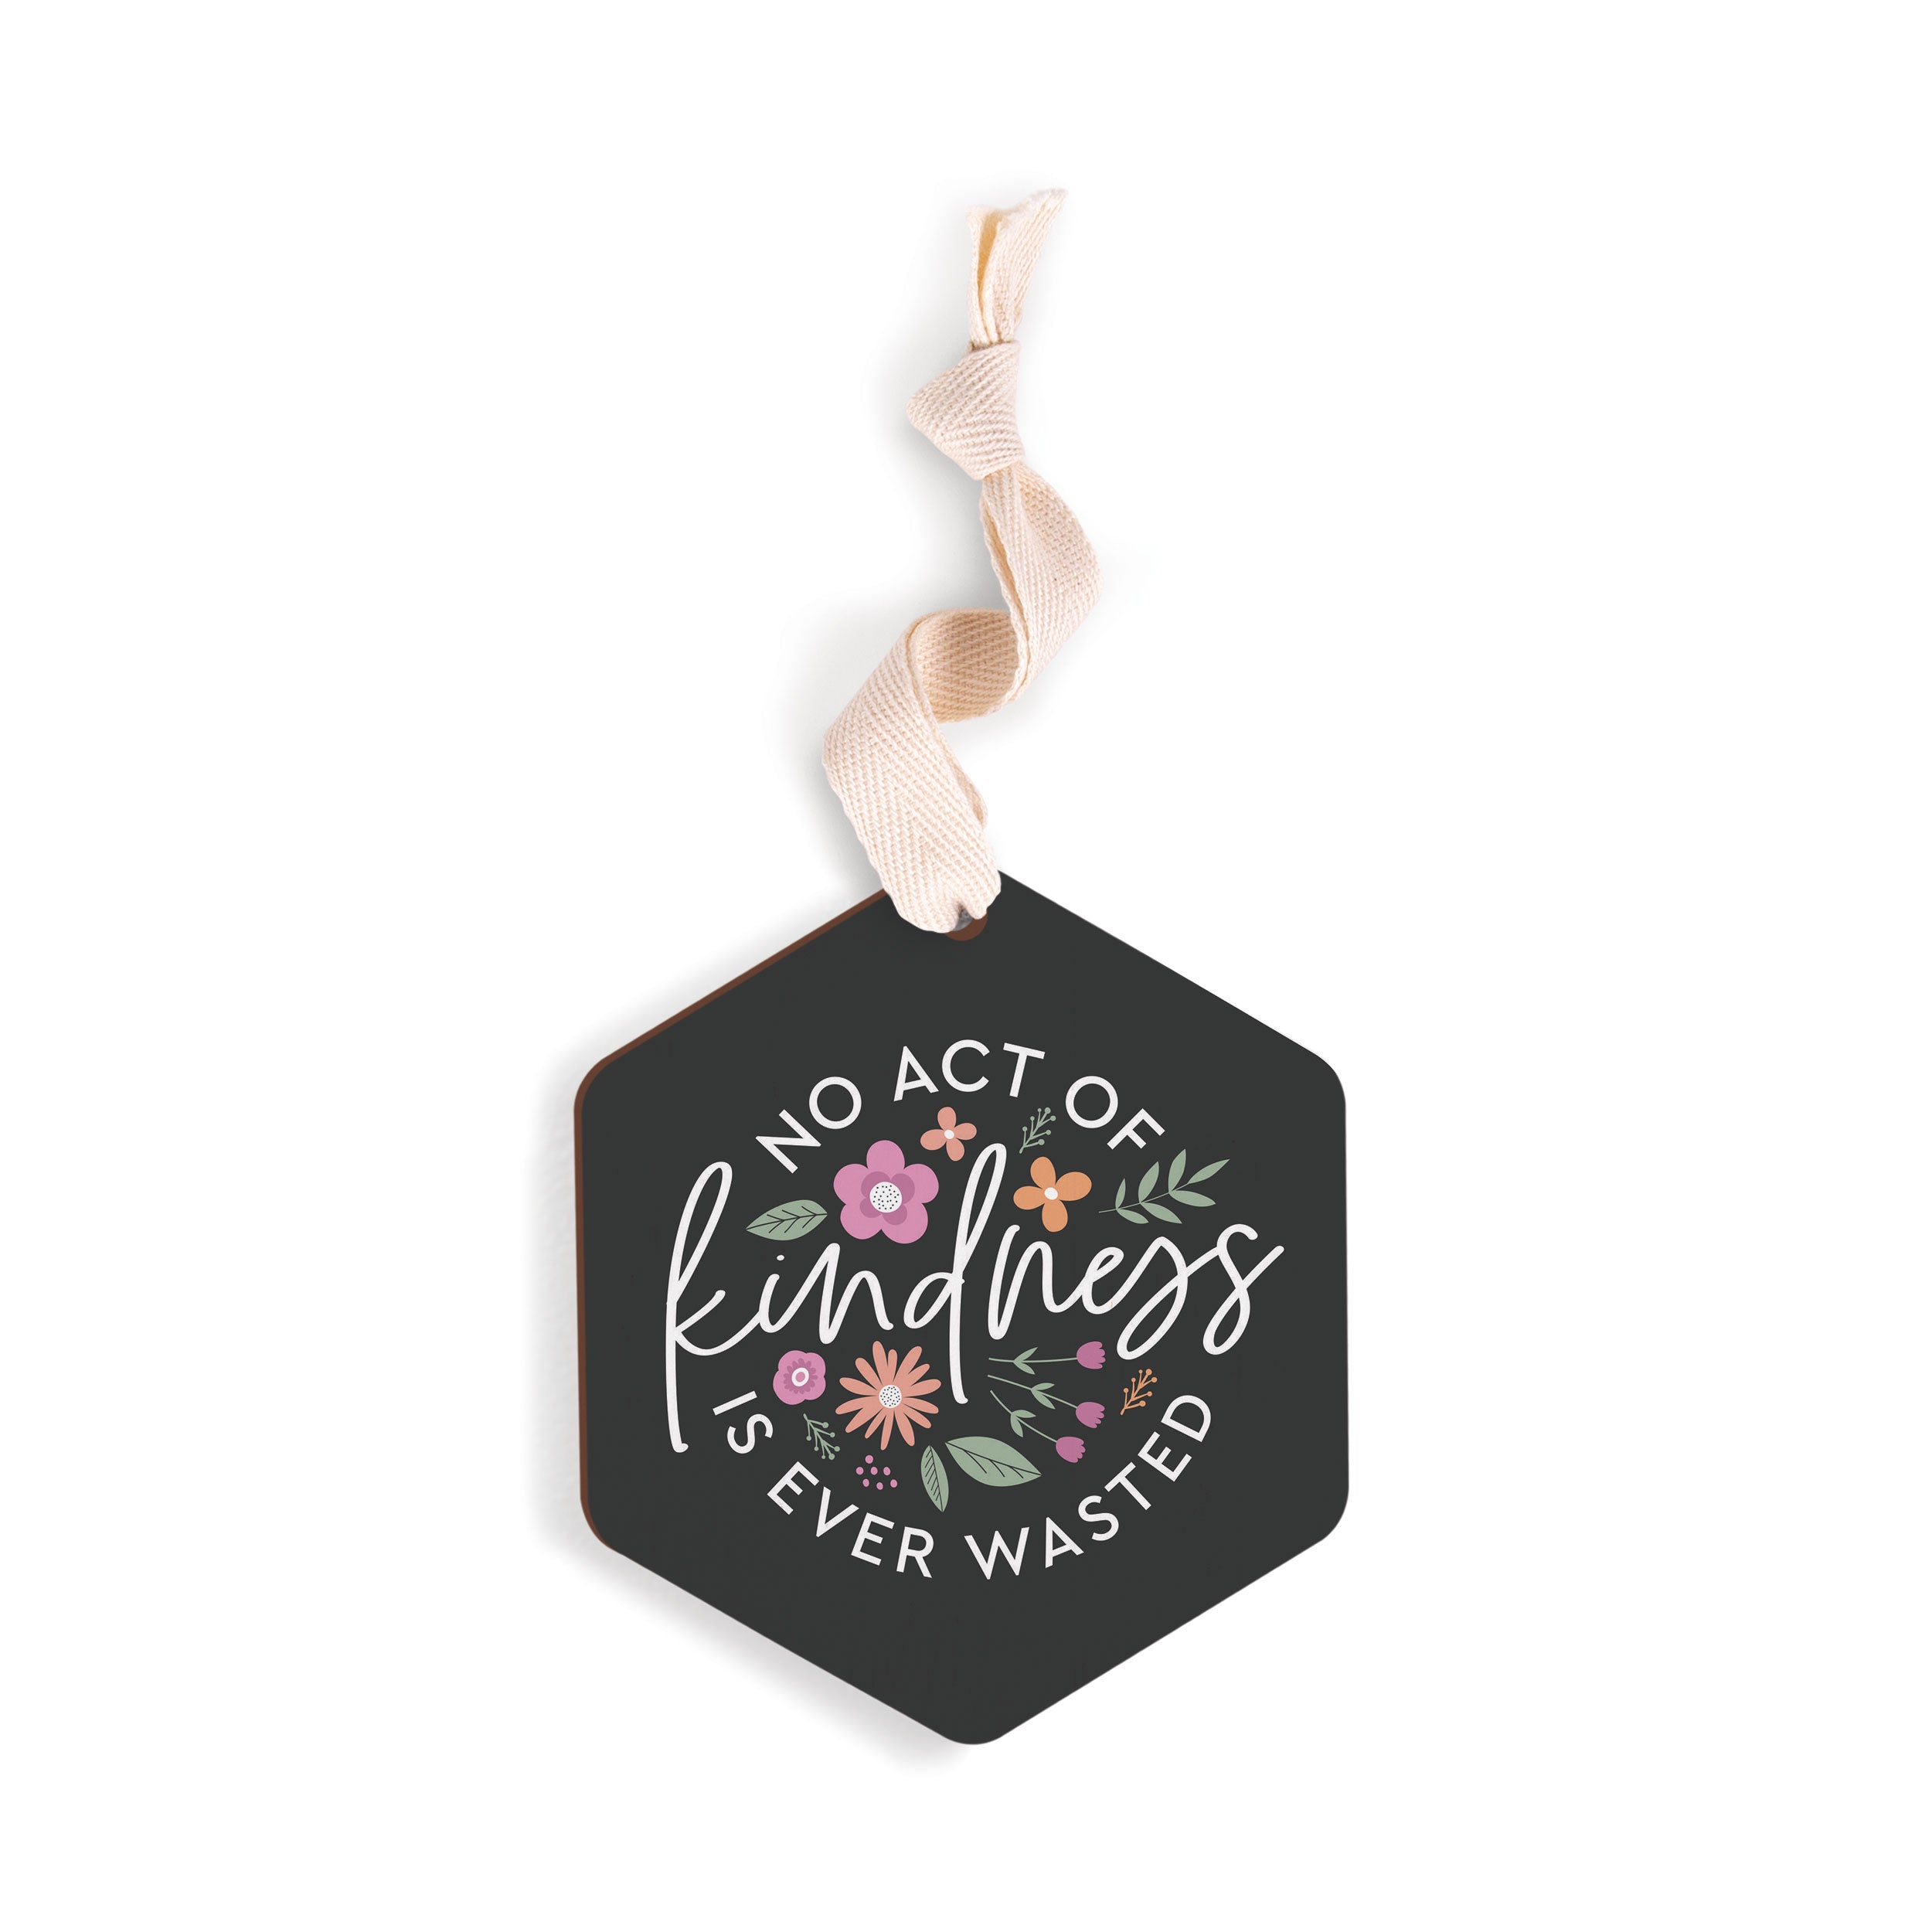 No Act of Kindness Is Ever Wasted Decorative Hanging Sign